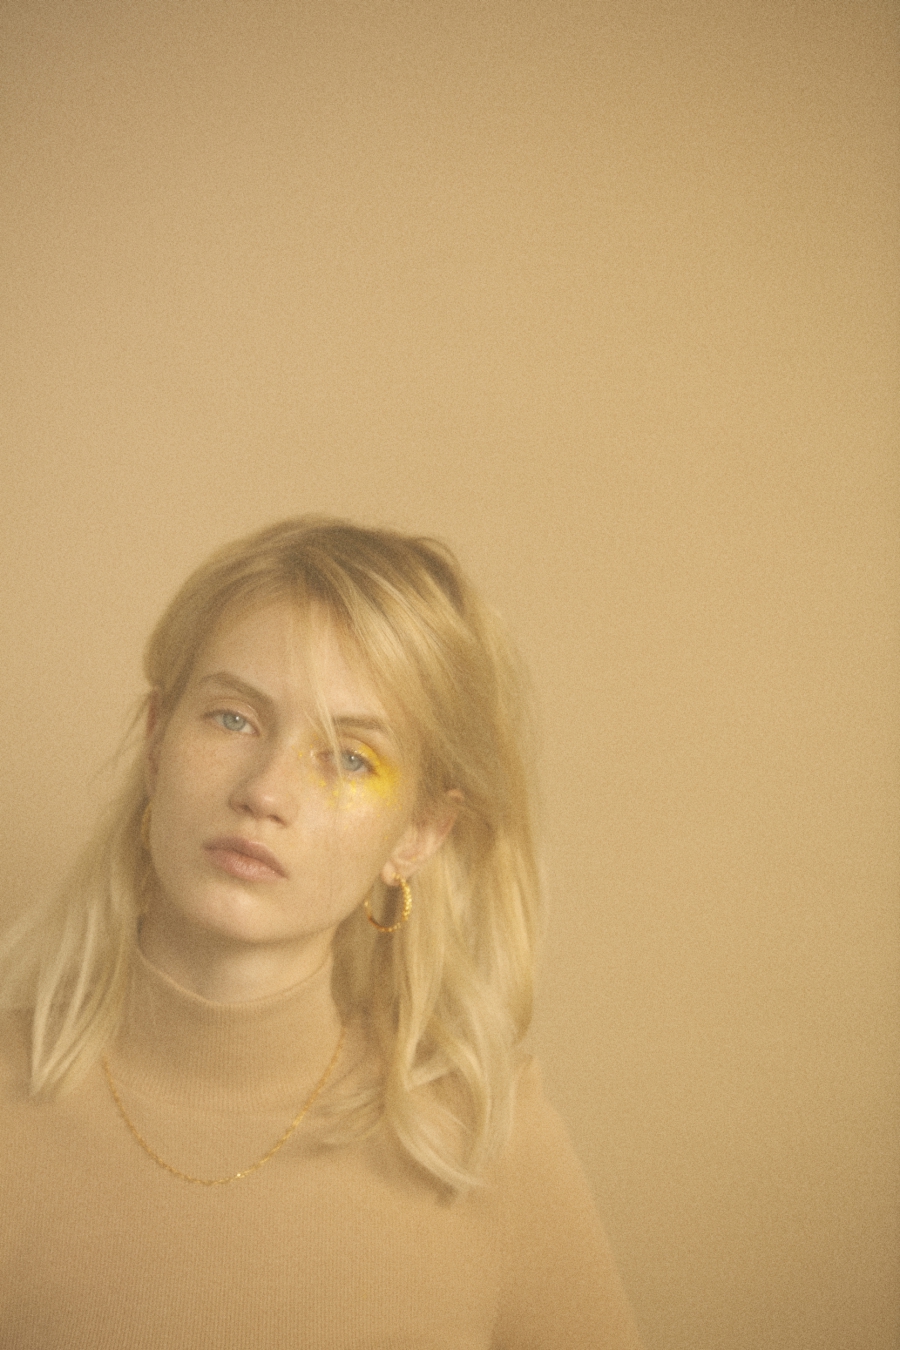 EDITORIAL: YELLOW TEST STYLED BY KAS KRYST